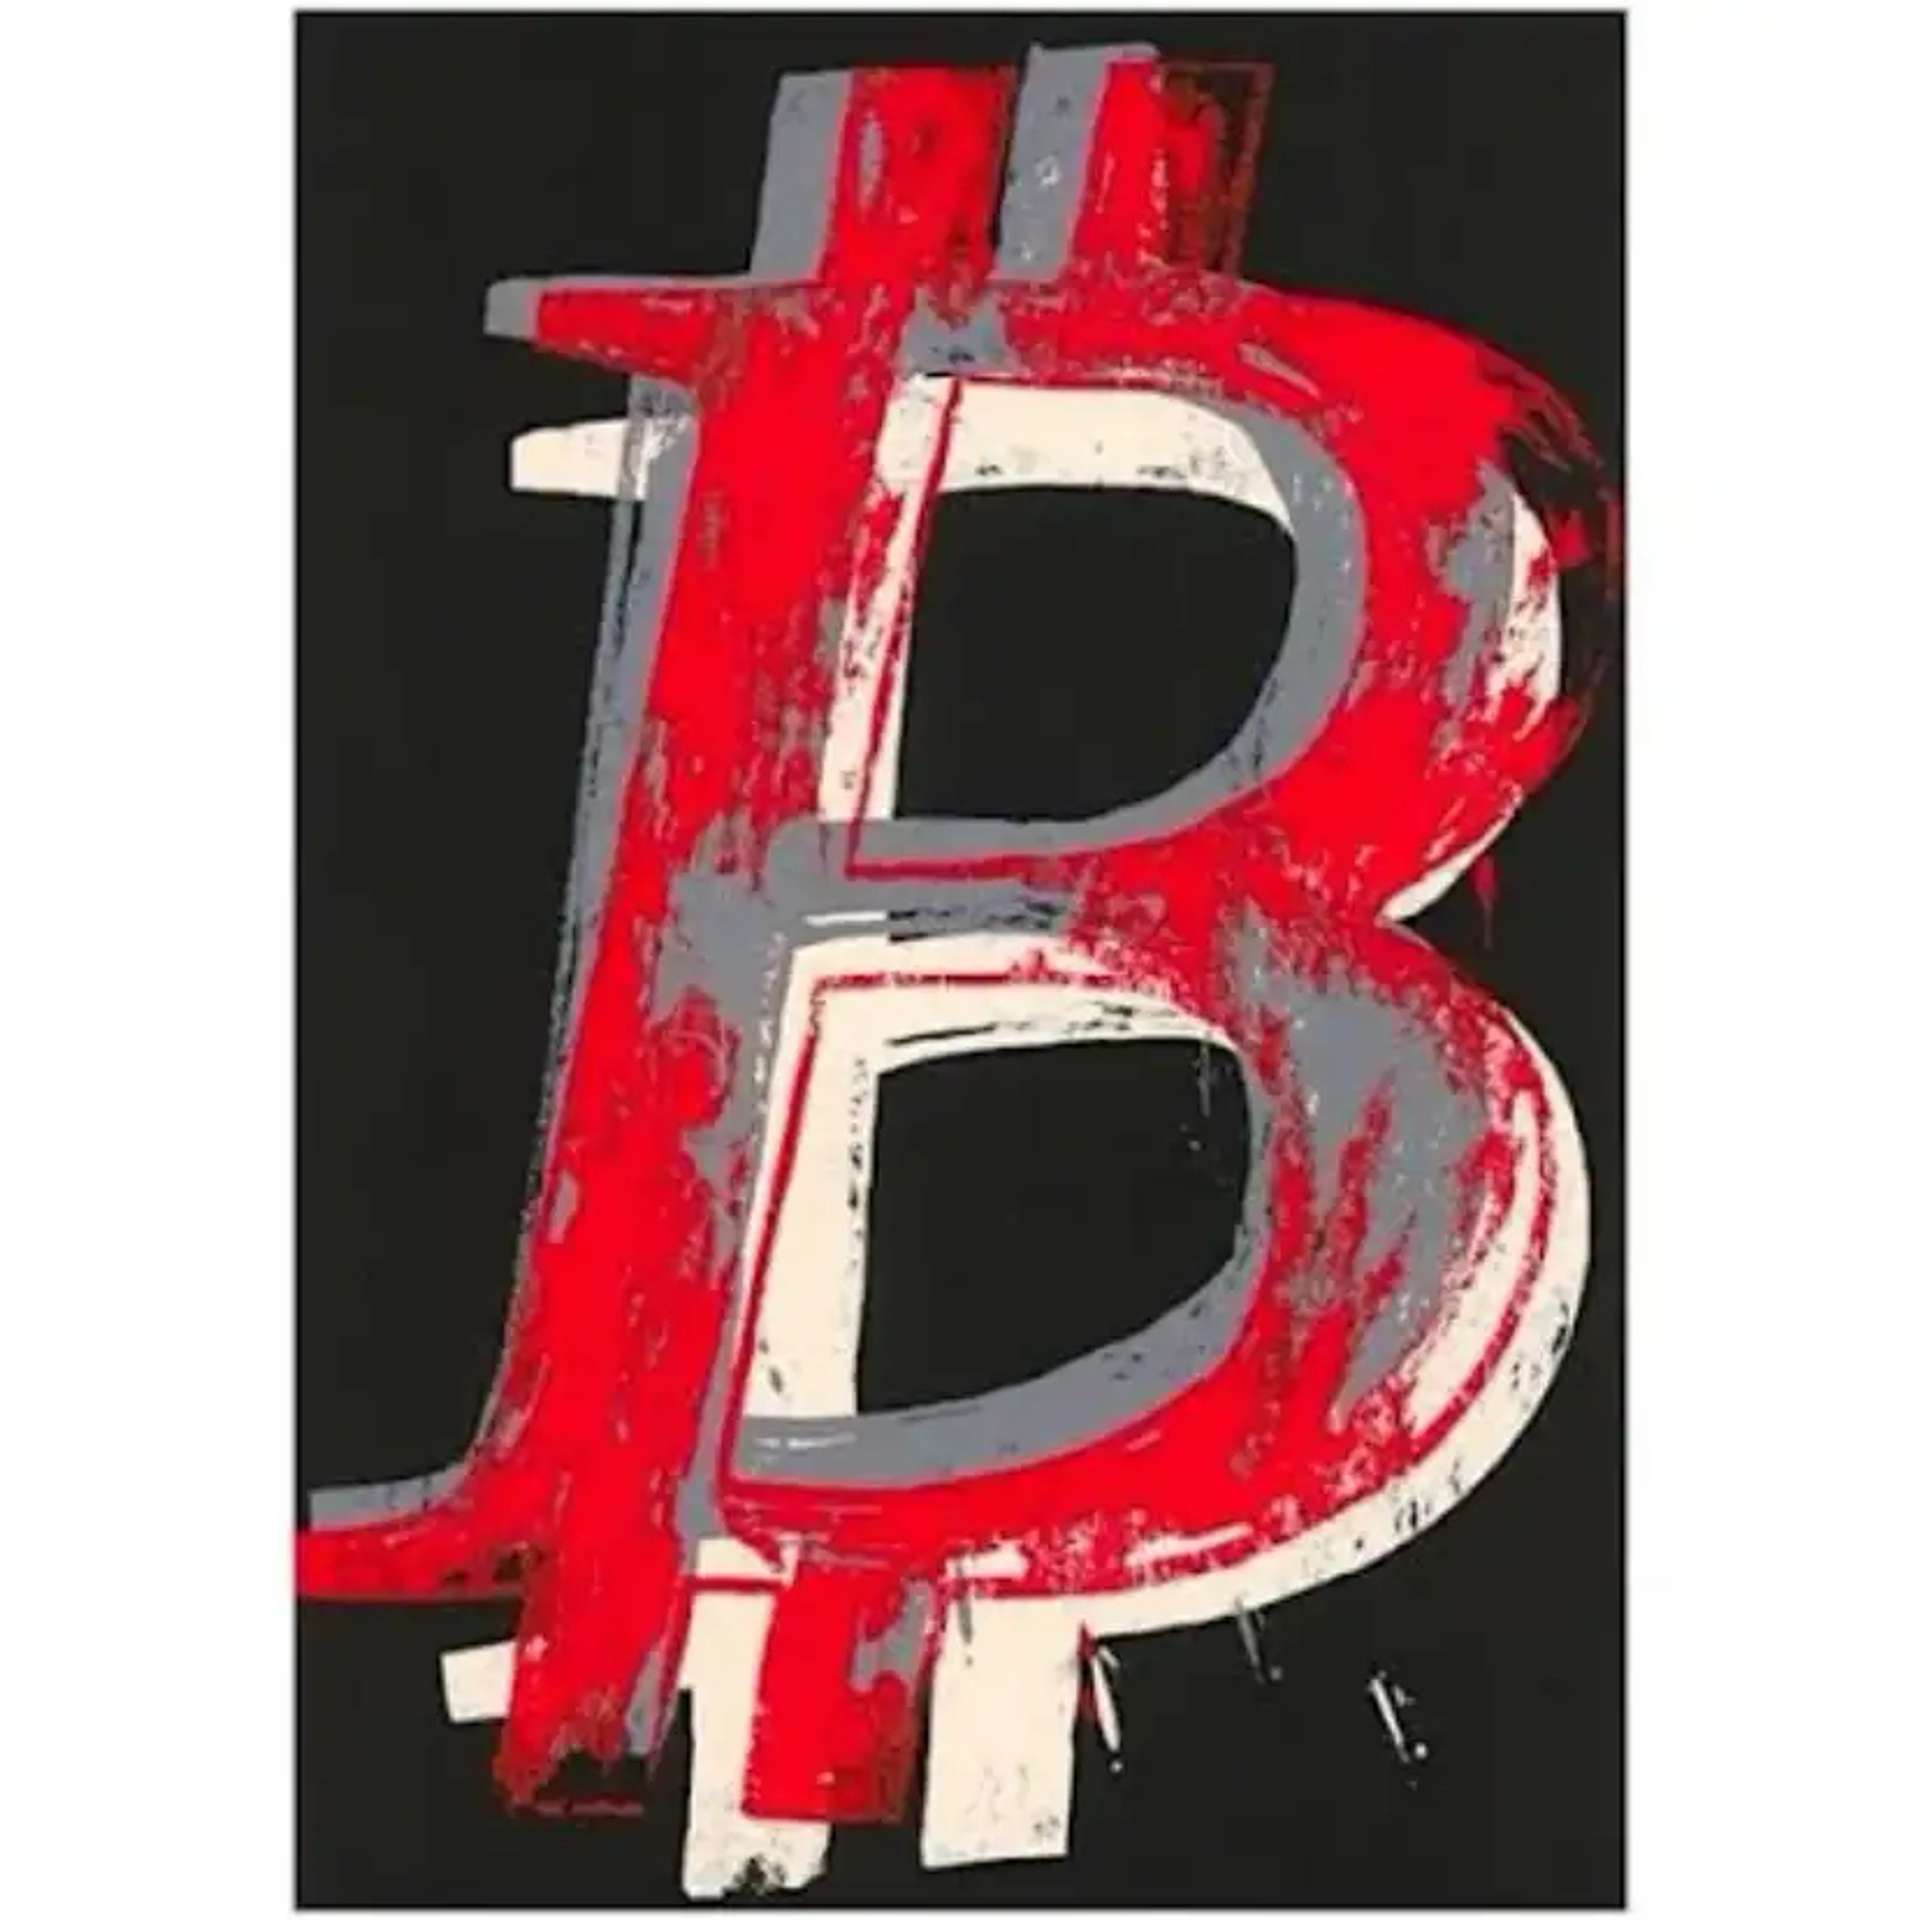 Bitcoin-themed screenprint featuring a red and grey 'B' shaped like a dollar sign on a black background, reminiscent of Andy Warhol's iconic dollar sign artwork.